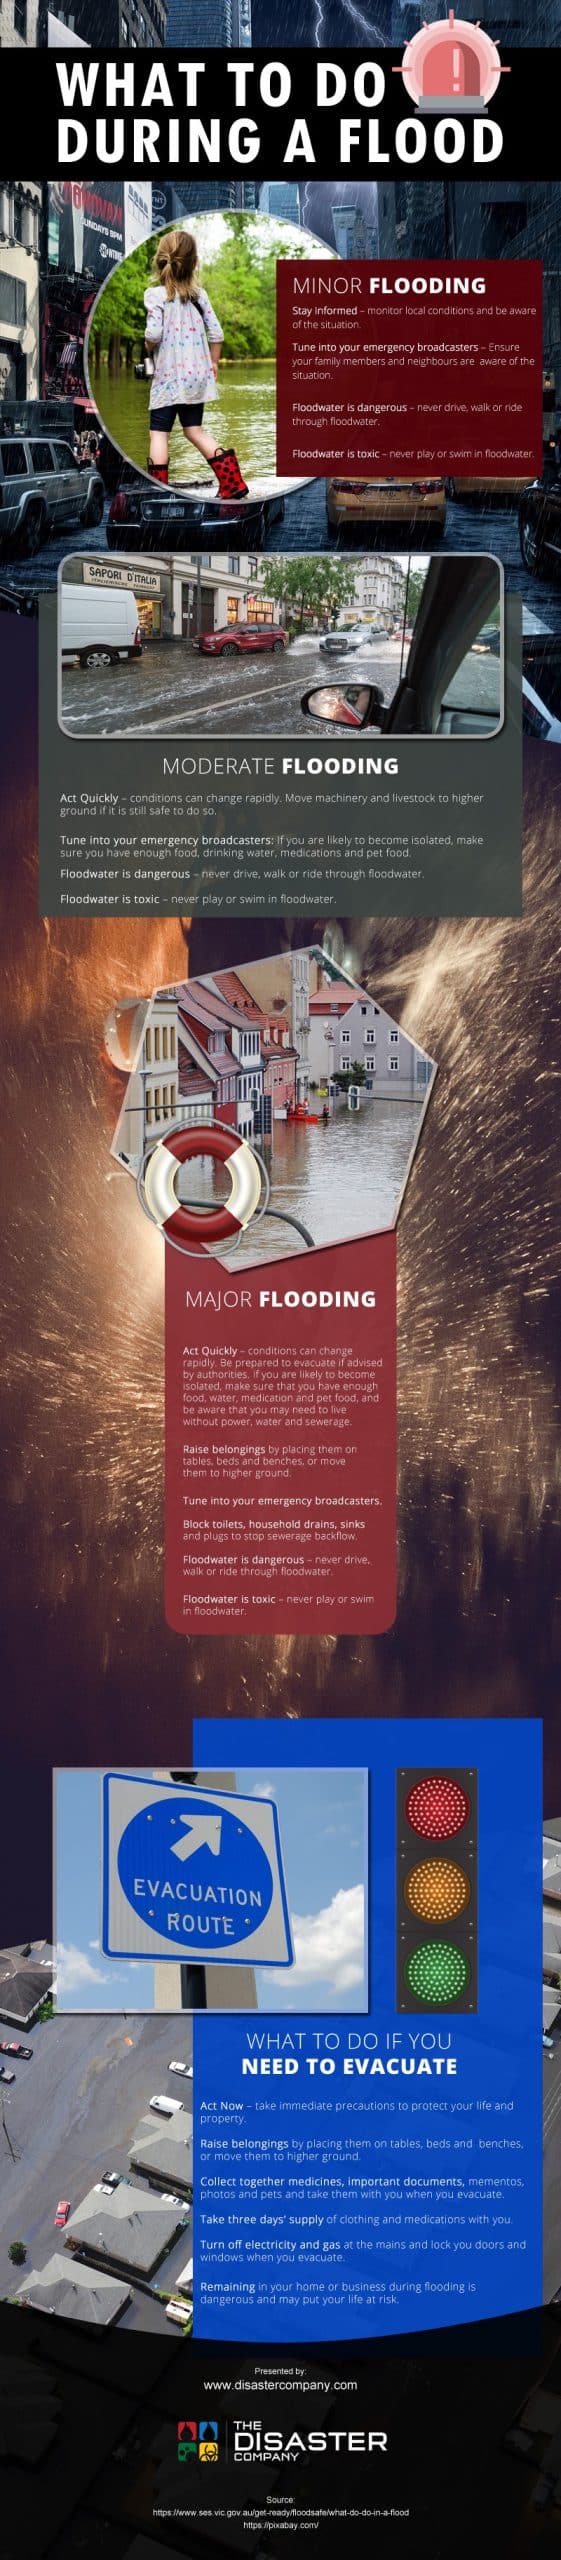 What to Do During a Flood [infographic]